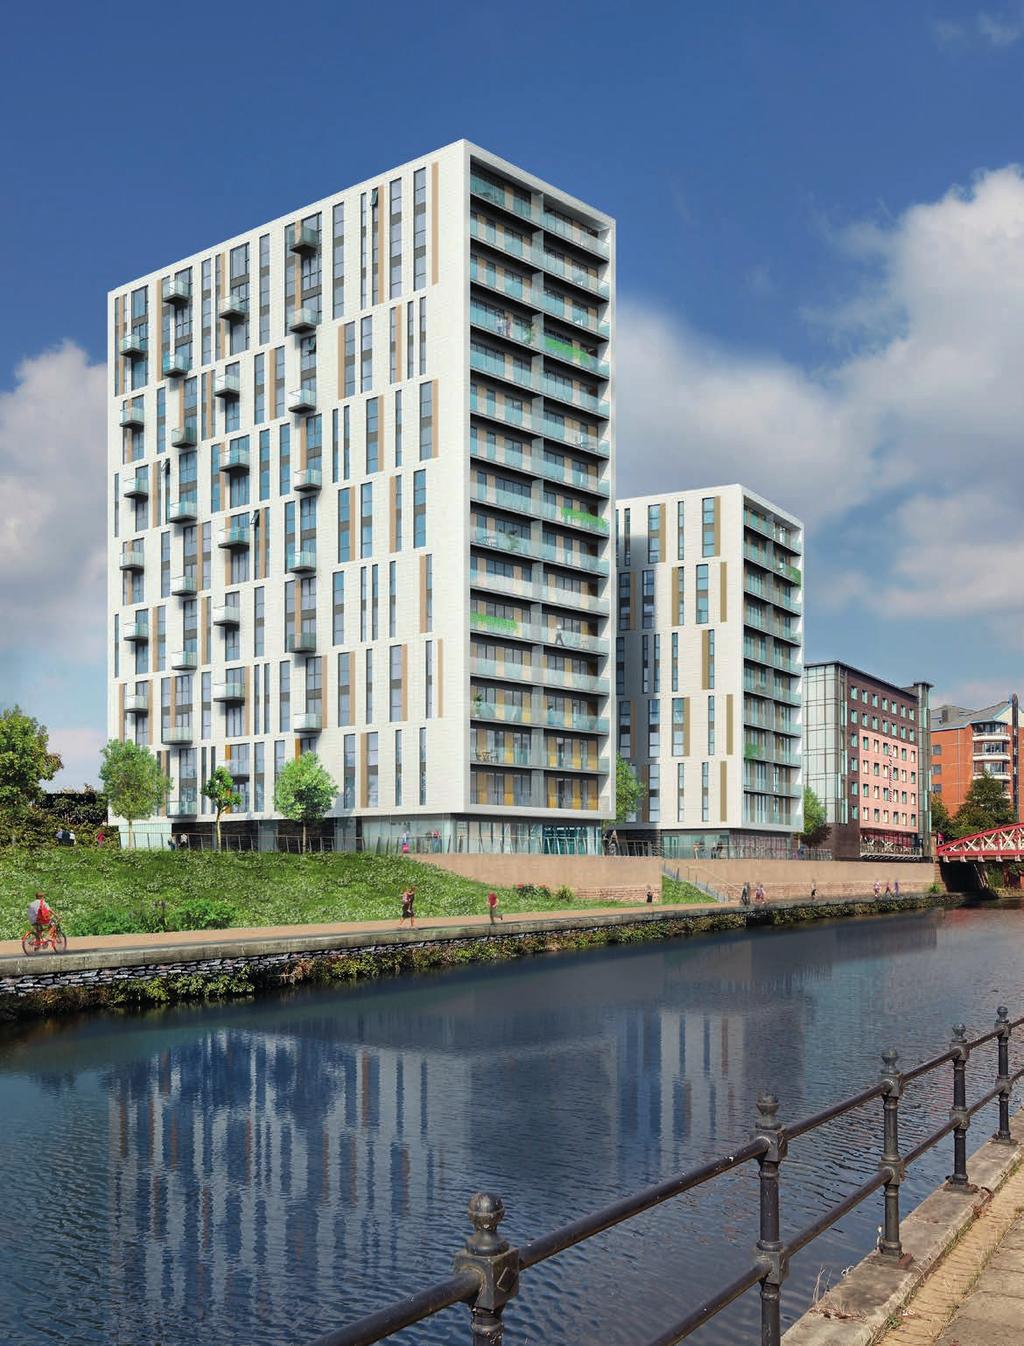 2018 Corporate Profile The Slate Yard, Salford. Our first build-to-rent scheme comprises 225 apartments designed to meet the bespoke demands of the rental market.